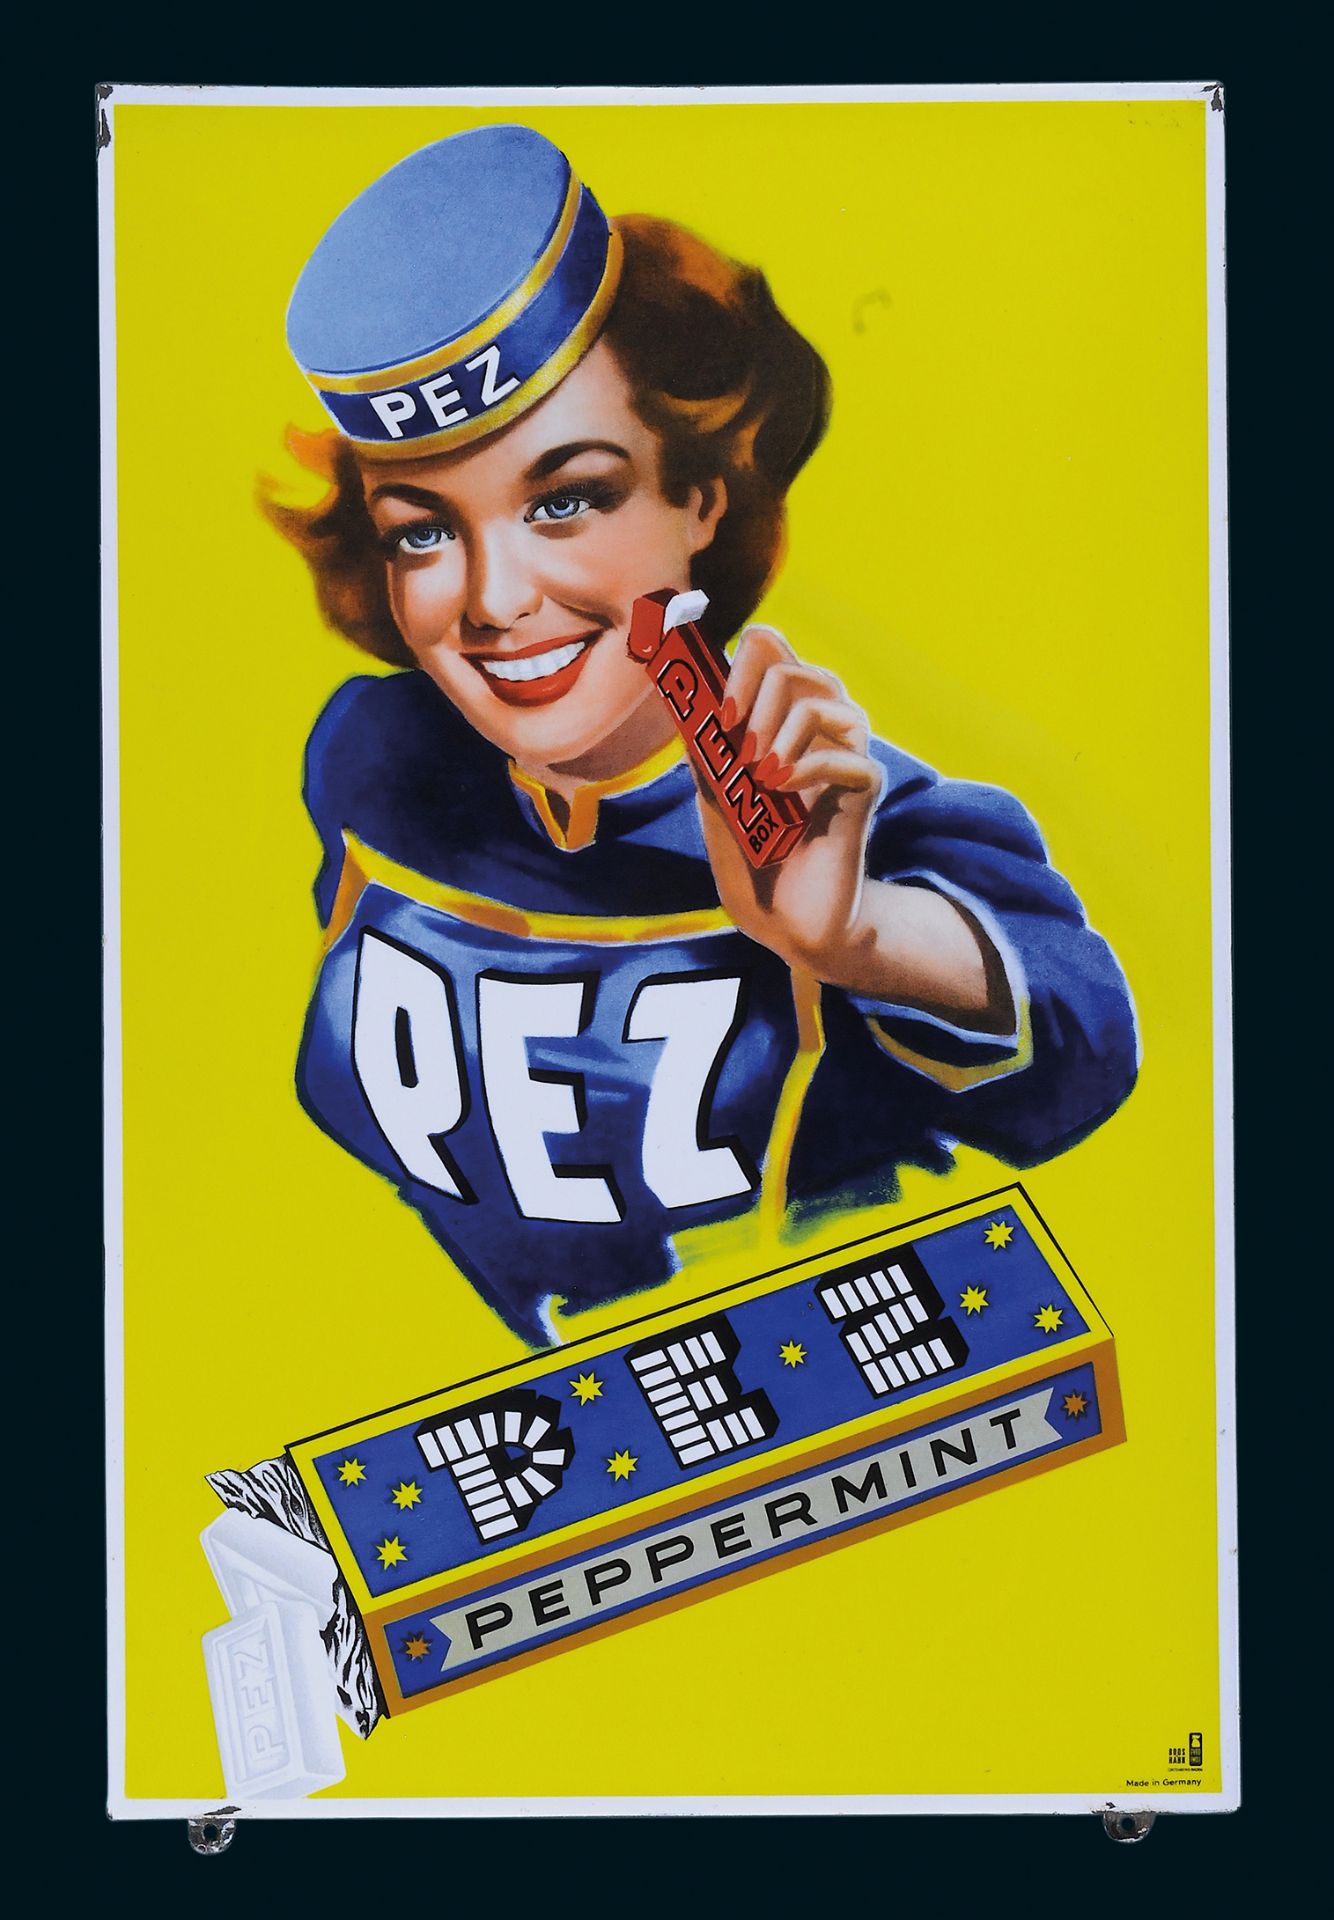 Pez Peppermint - Image 4 of 4